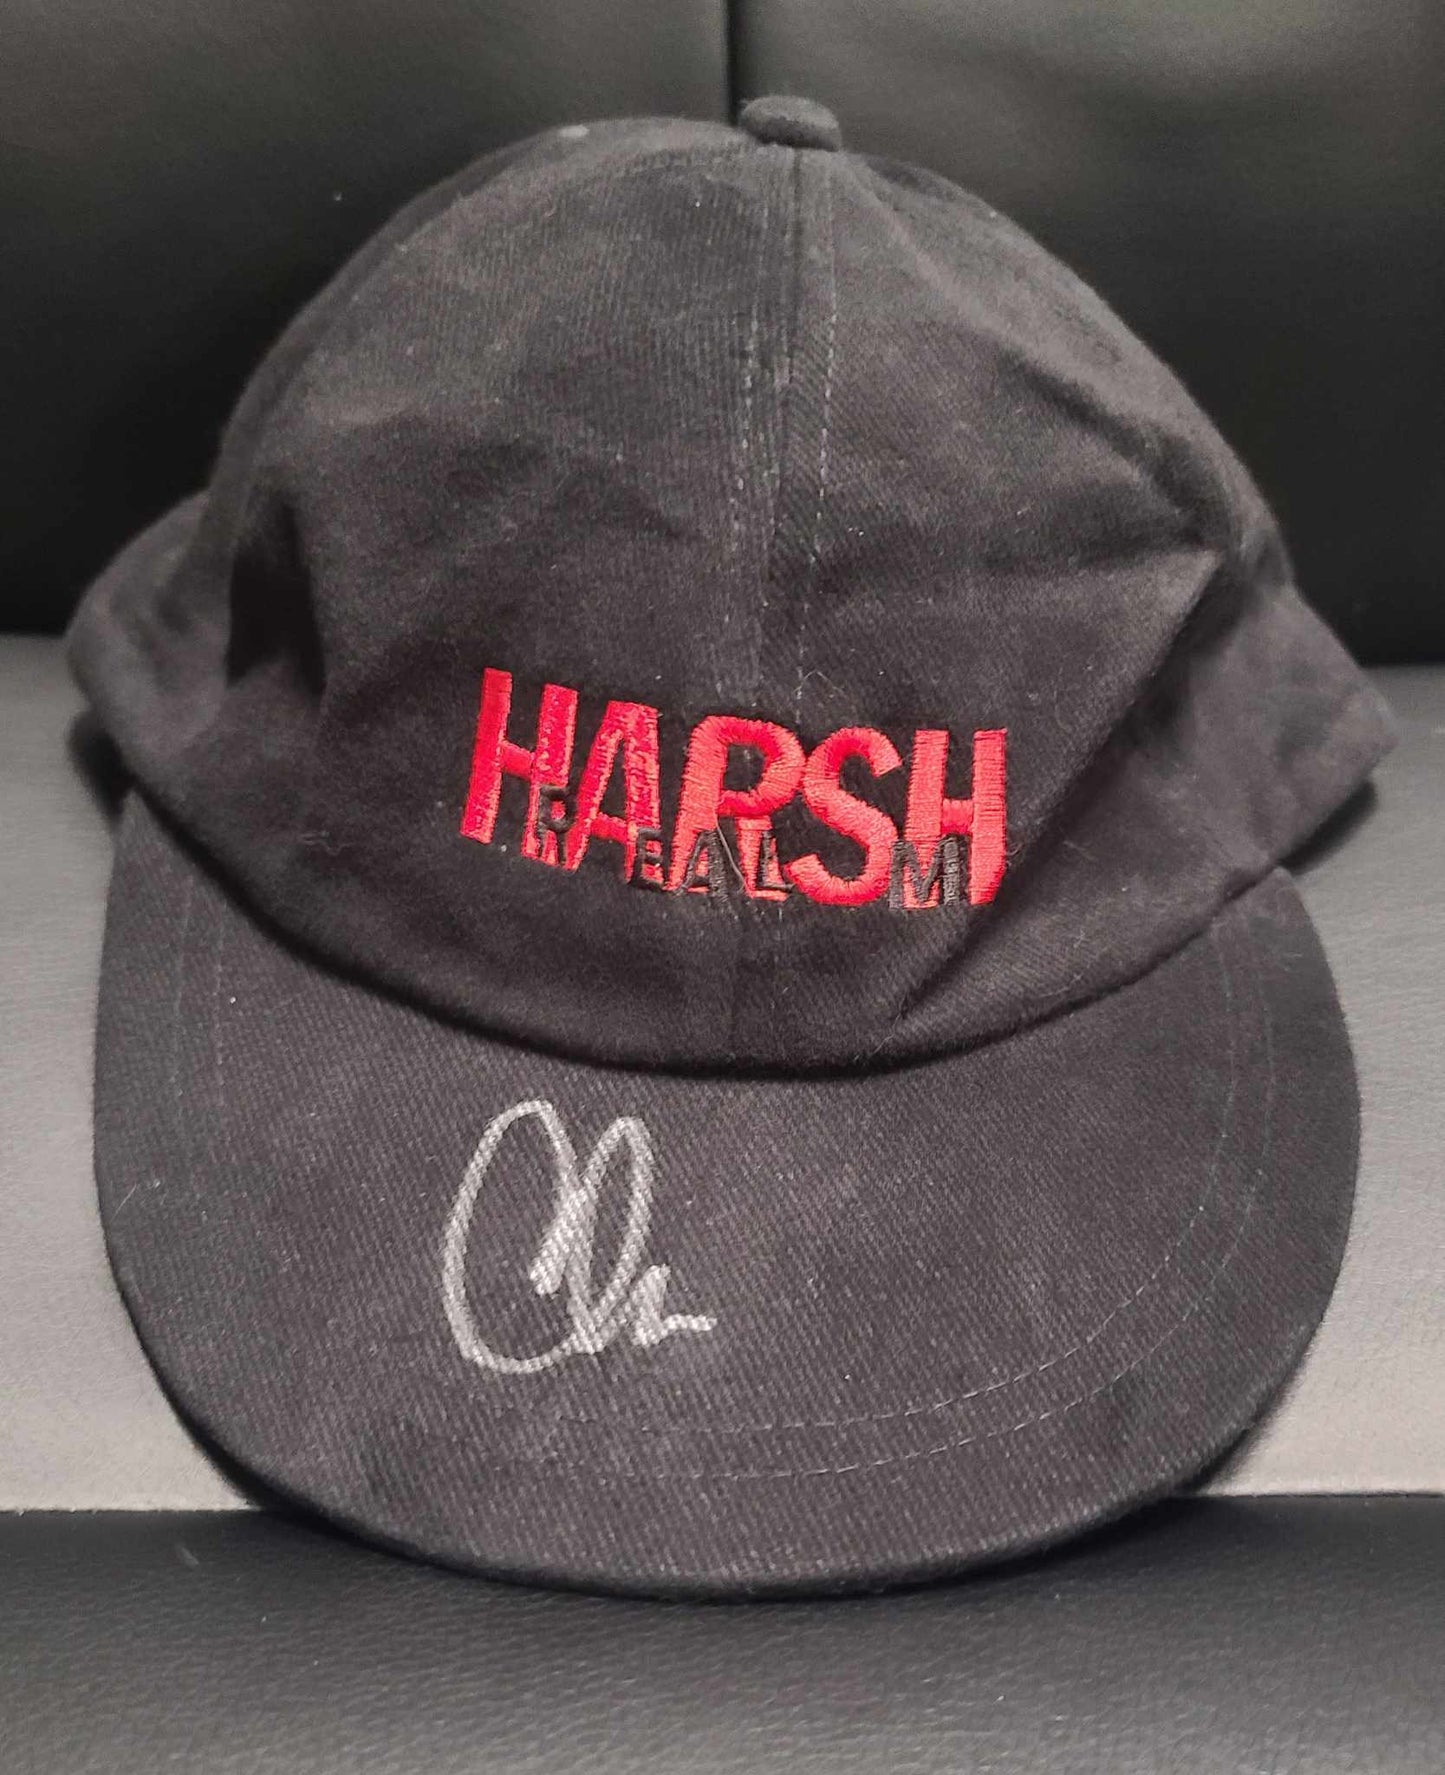 Harsh Realm Hat -Autographed by Chris Carter